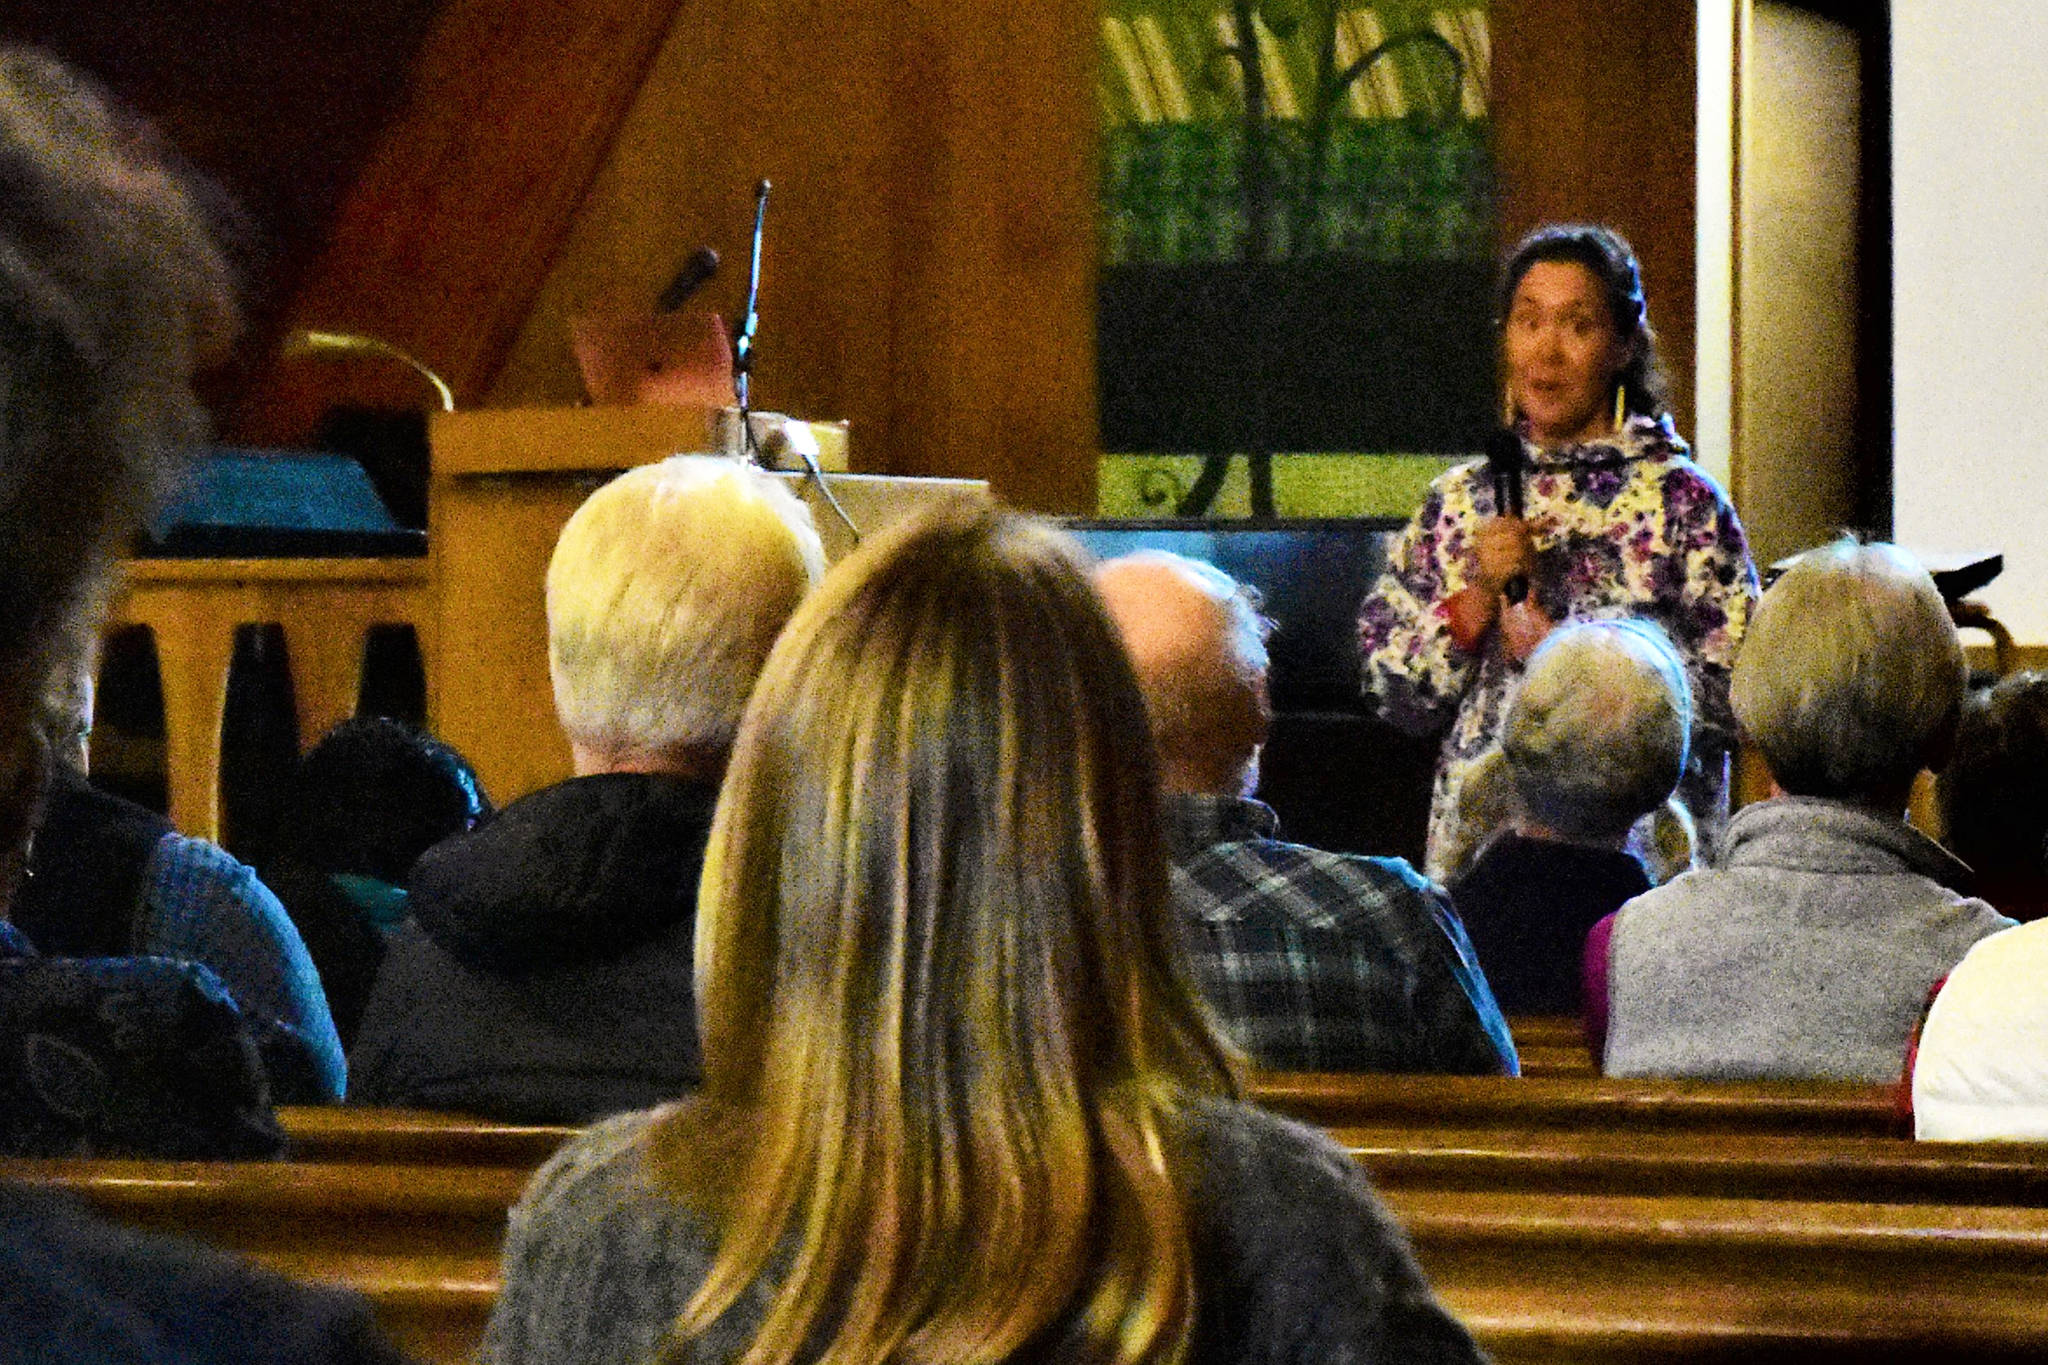 Melanie Brown speaks at Northern Light United Church in Juneau during the “Climate Change Through the Eyes of Alaska Natives,” forum on Sept. 12, 2019. (Peter Segall | Juneau Empire)